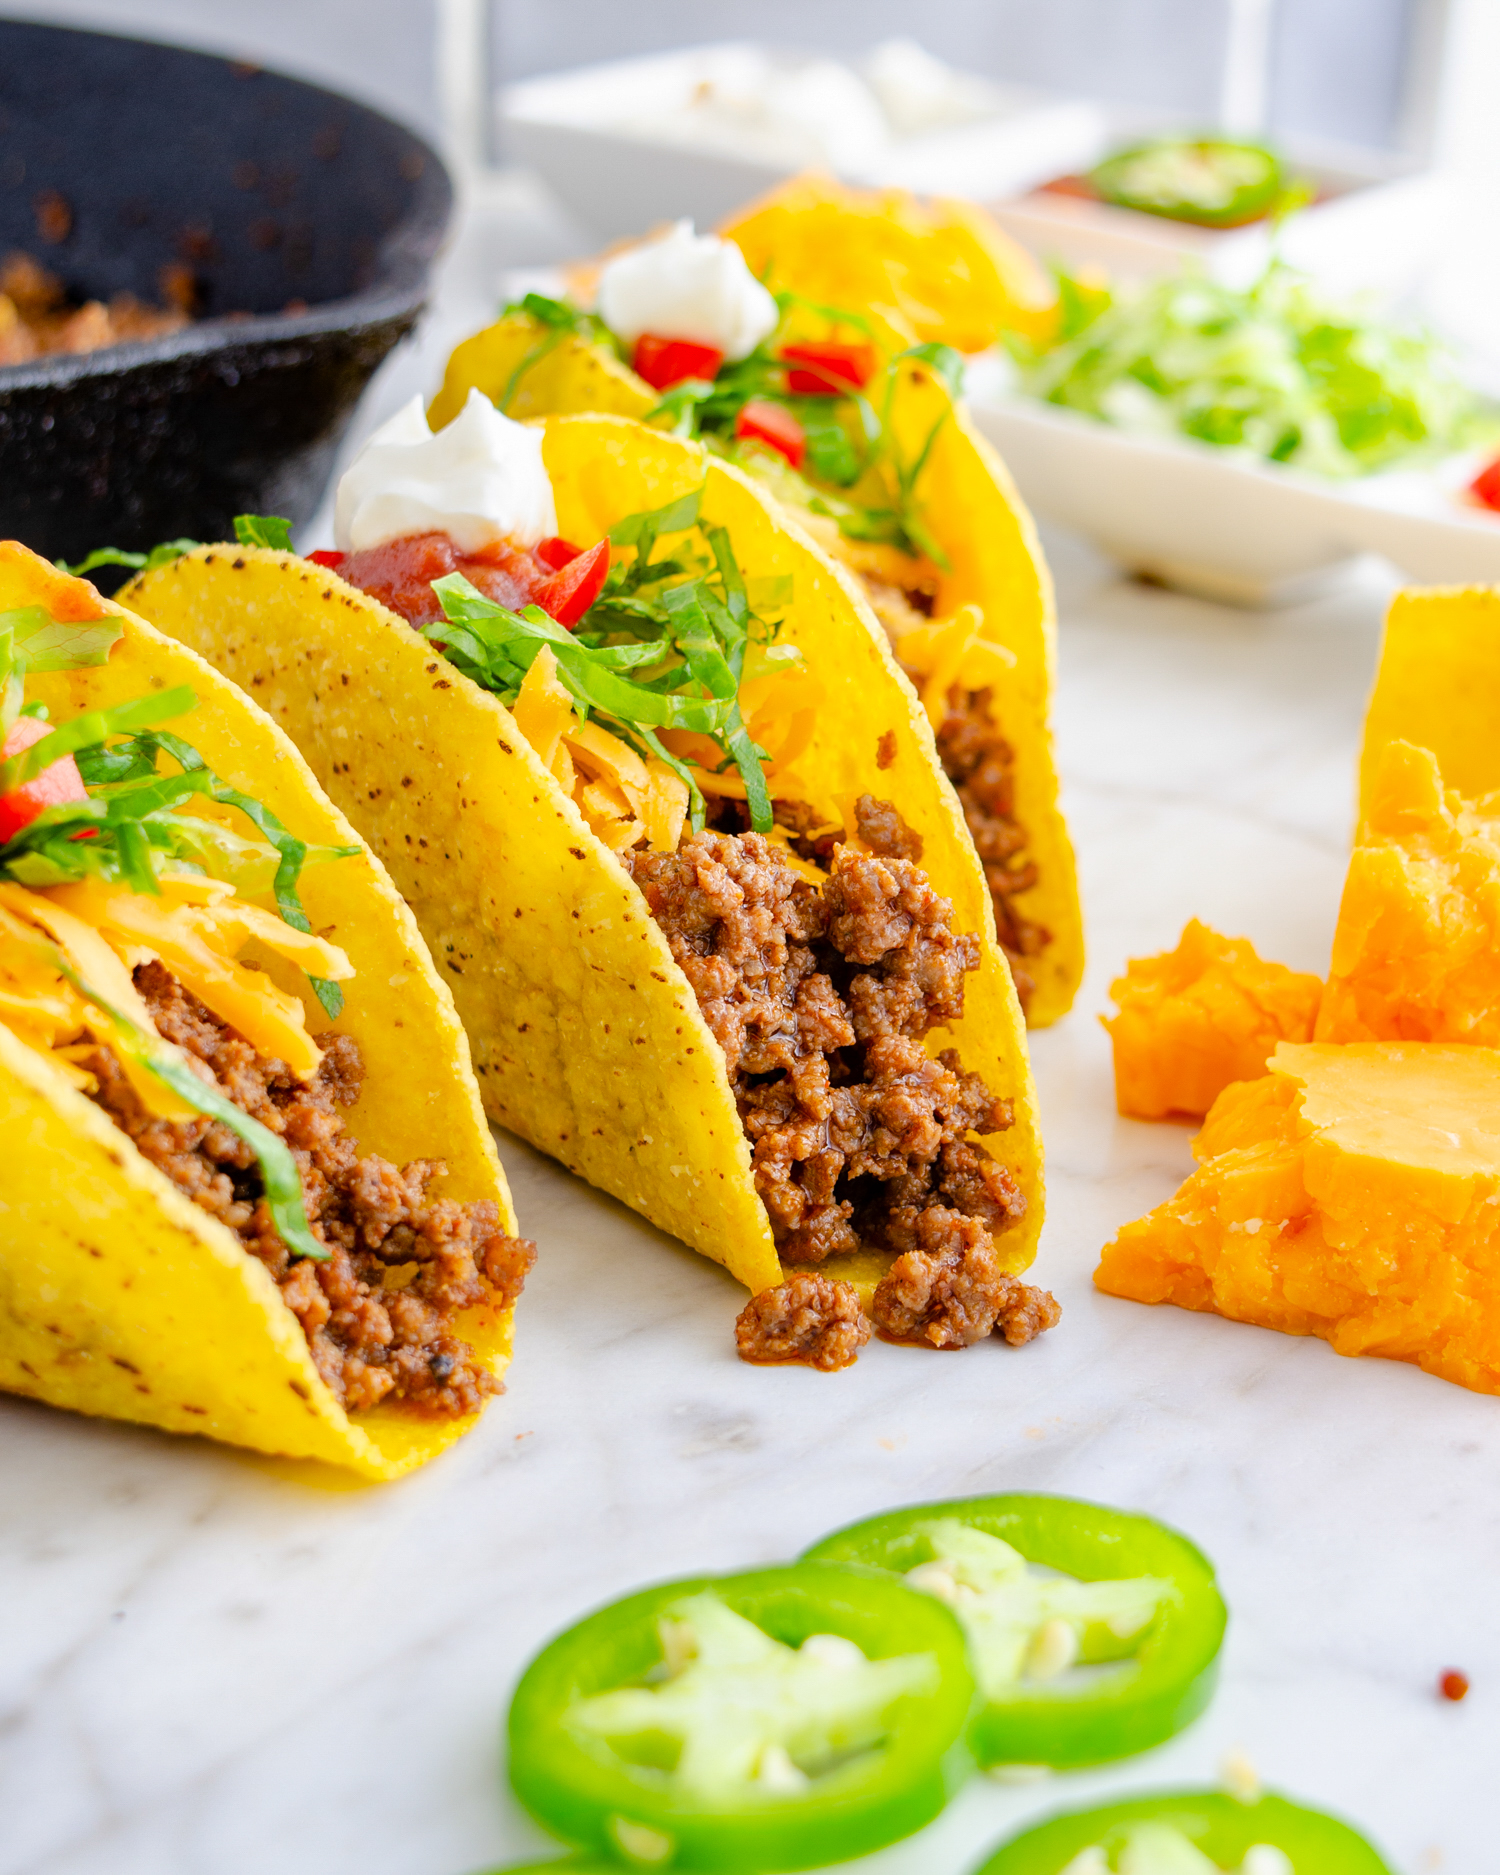 Taco Meat Recipe, How to cook taco meat, Meat for tacos, Mexican taco meat, Ground beef taco meat